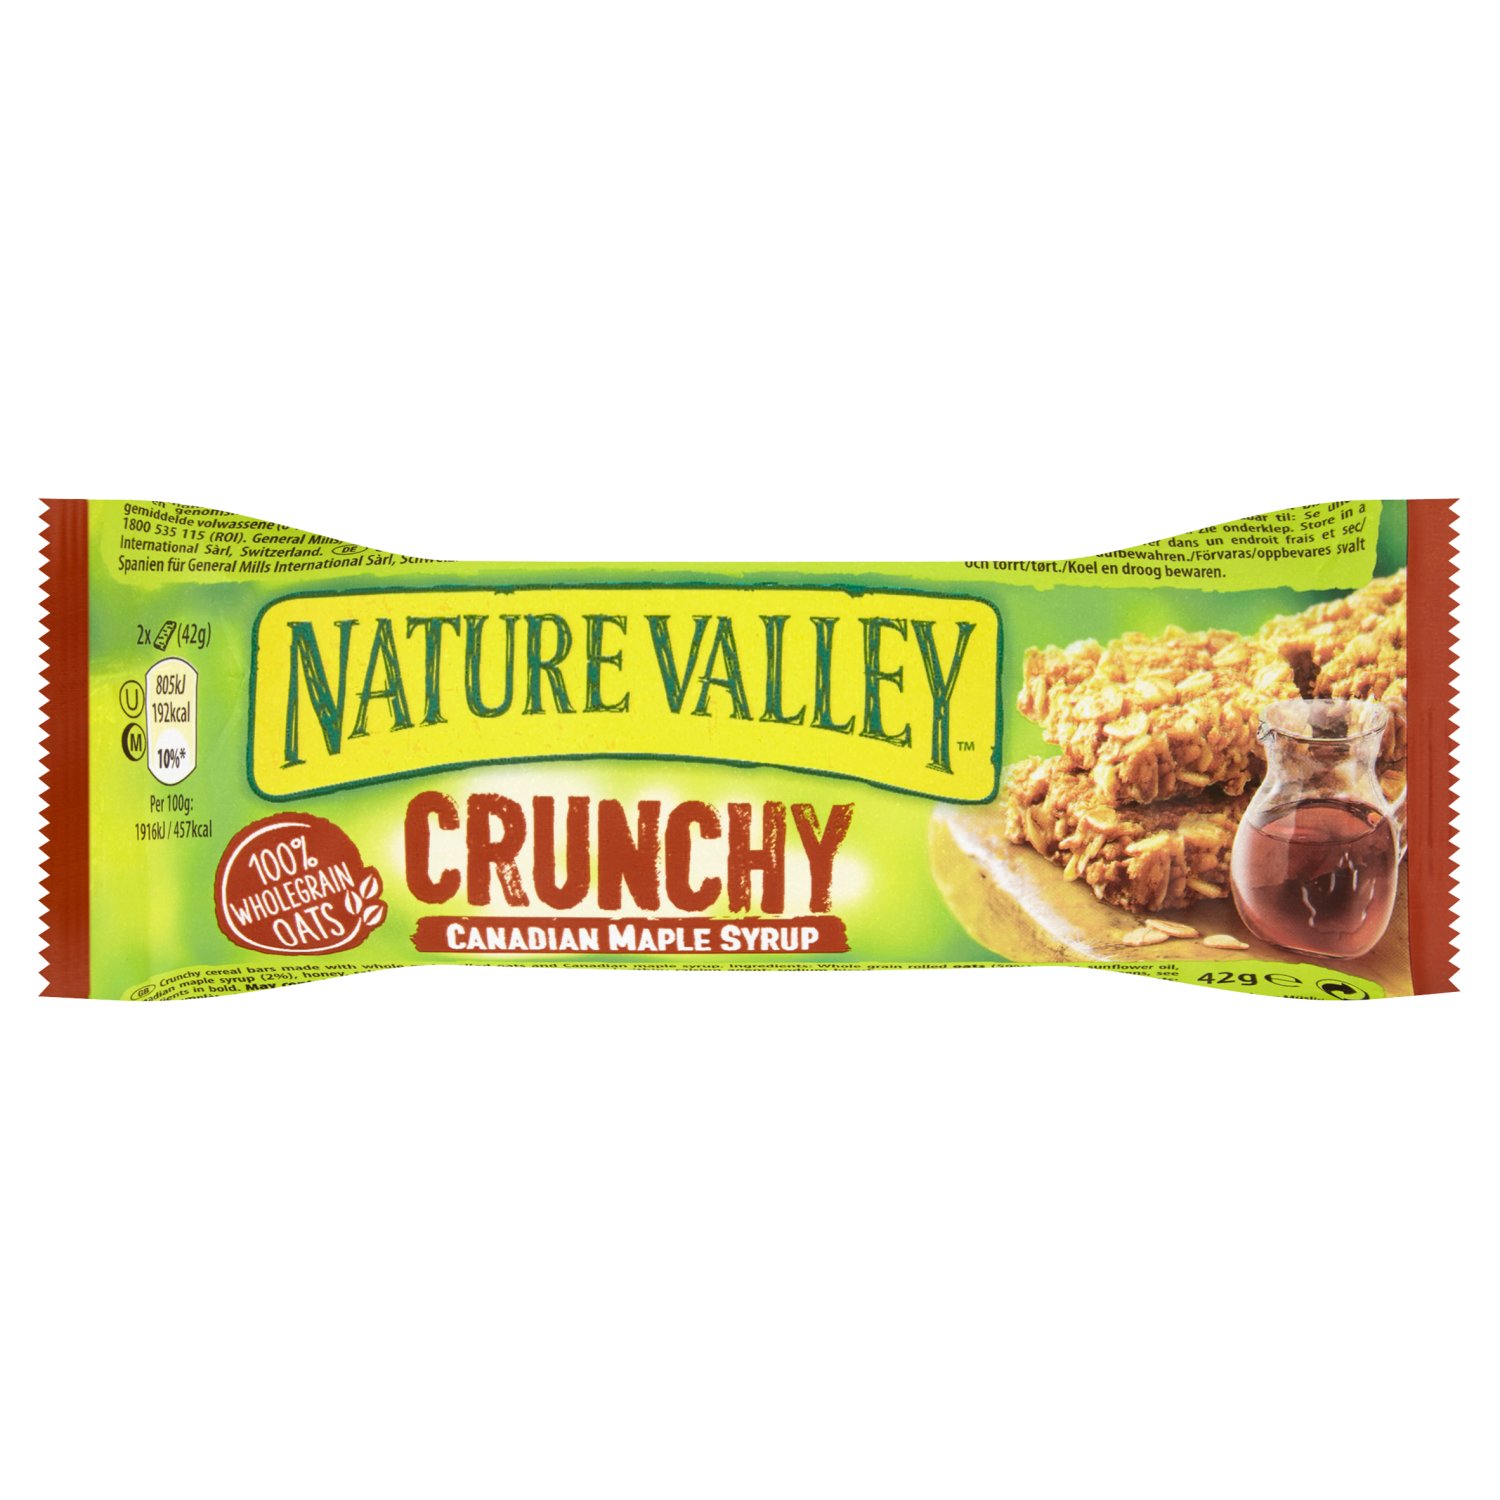 Nature Valley Crunchy Maple Syrup (42 g)